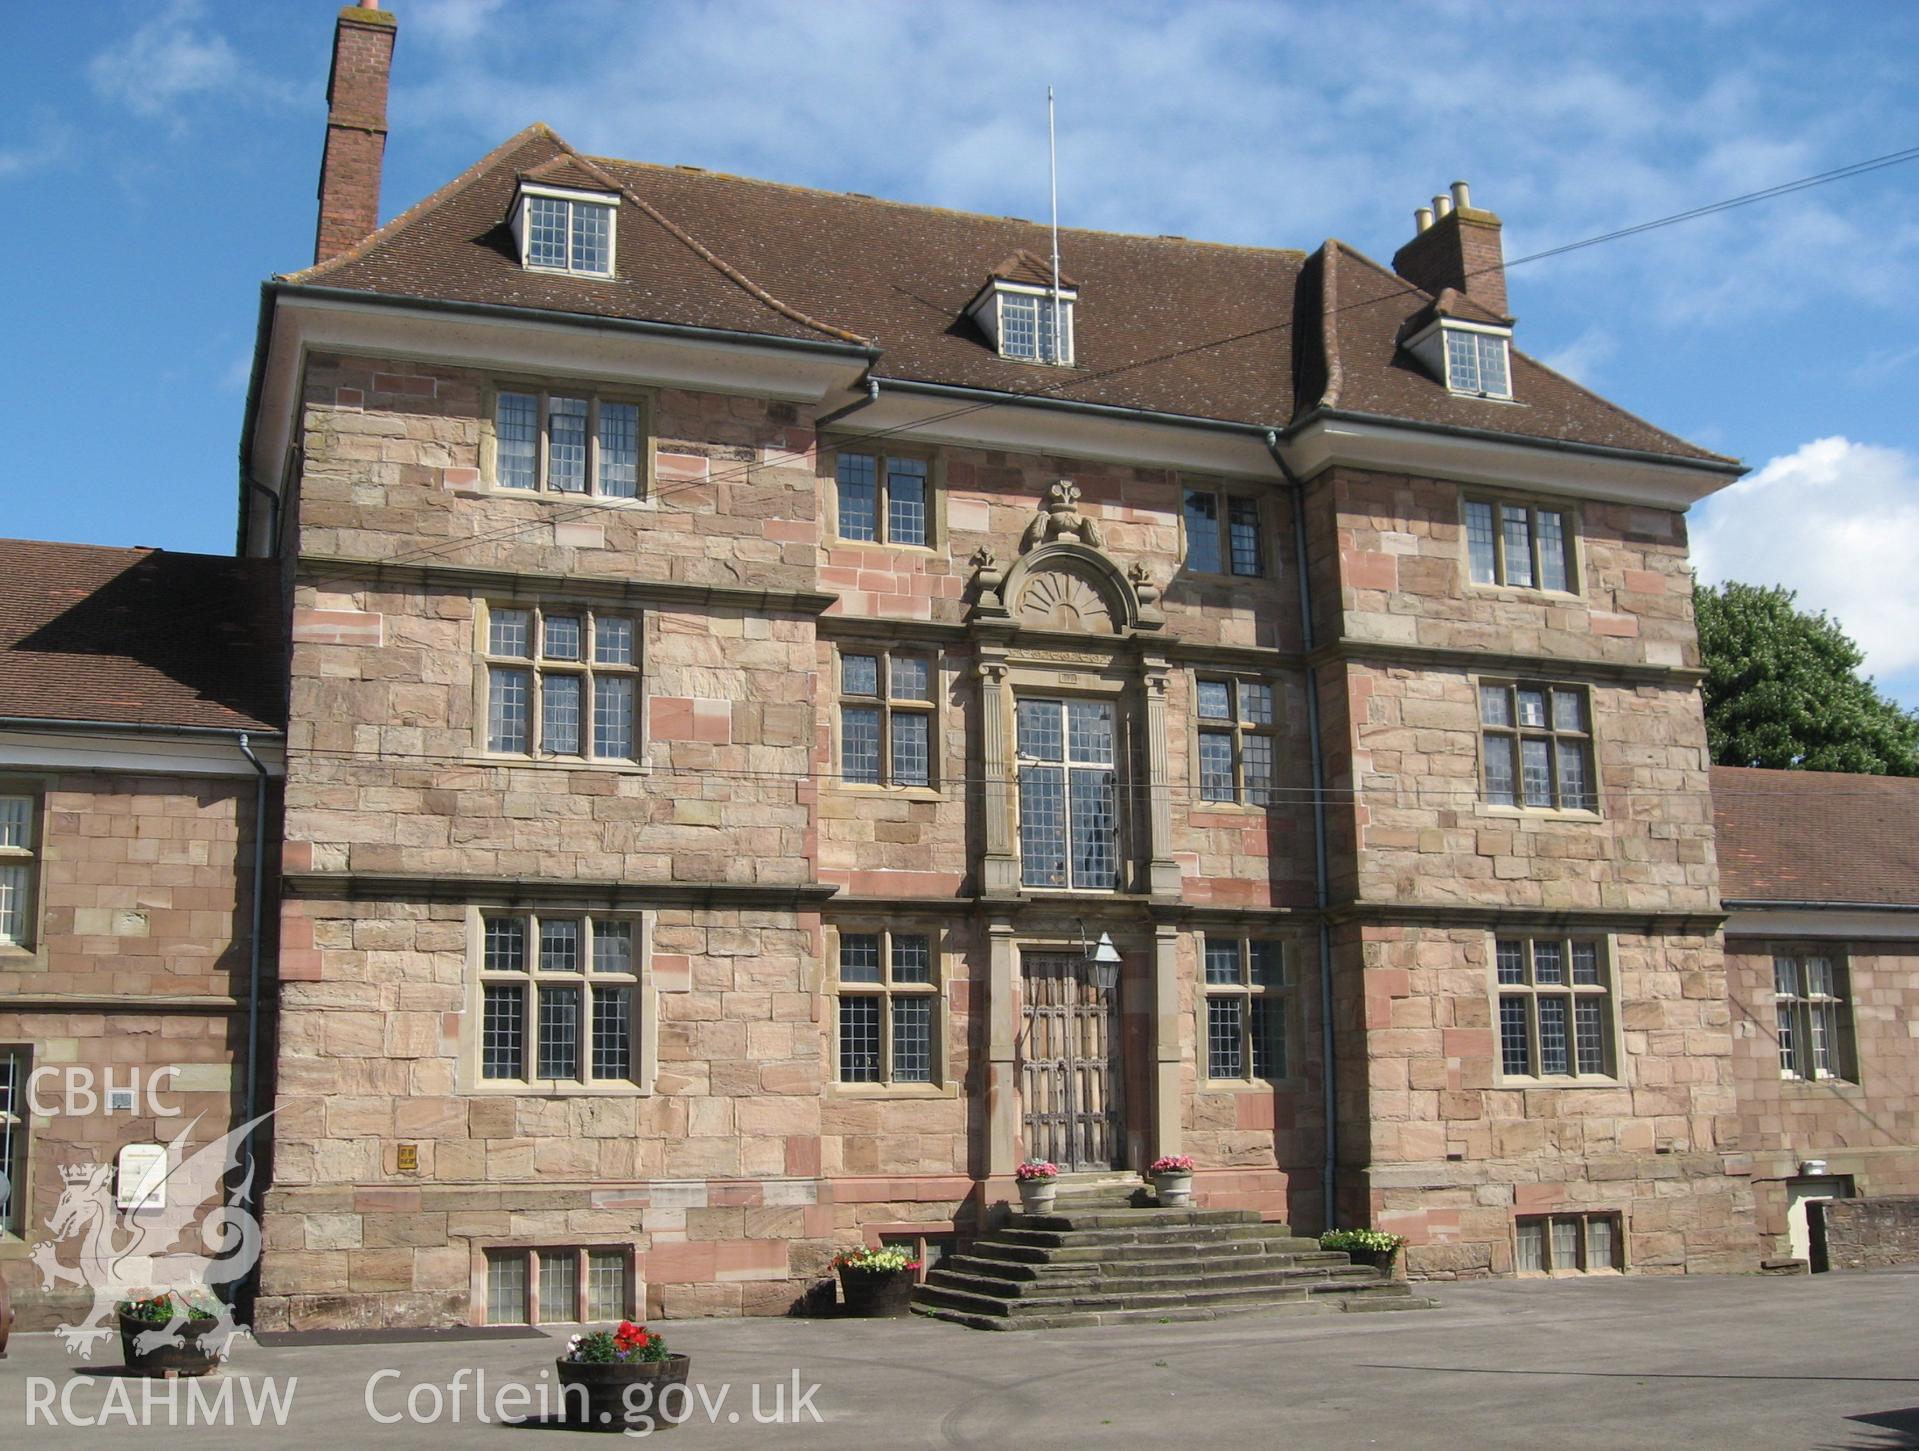 Colour photo showing Castle House, Monmouth, taken by Paul R. Davis and dated 1st June 2006.